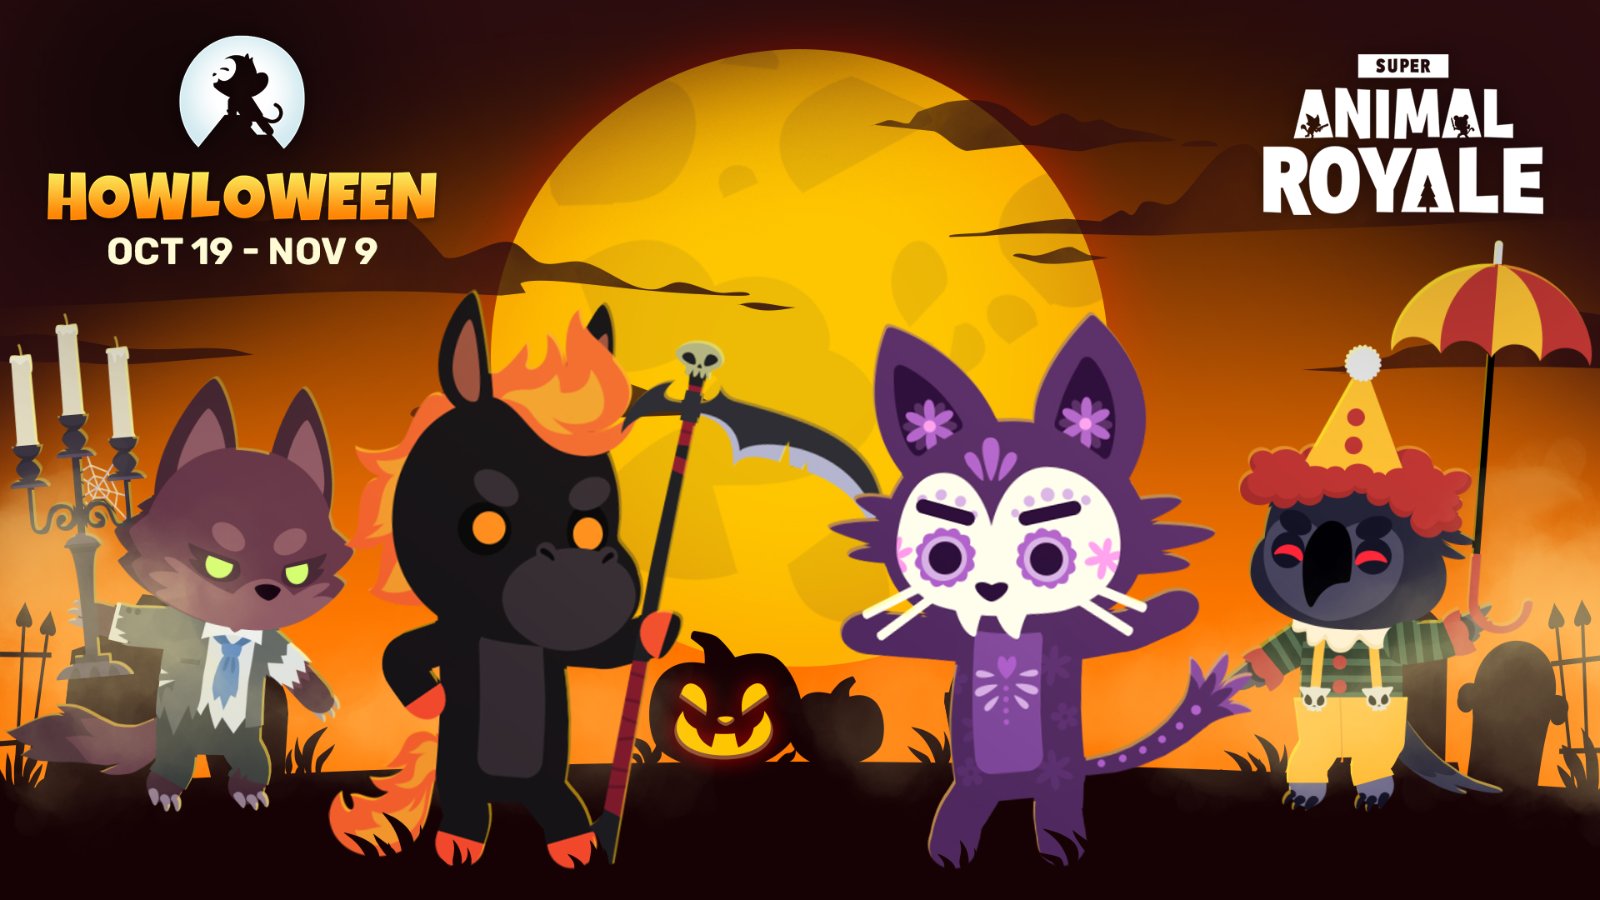 Super Animal Royale Update 1.1 Patch Notes for Howloween Content